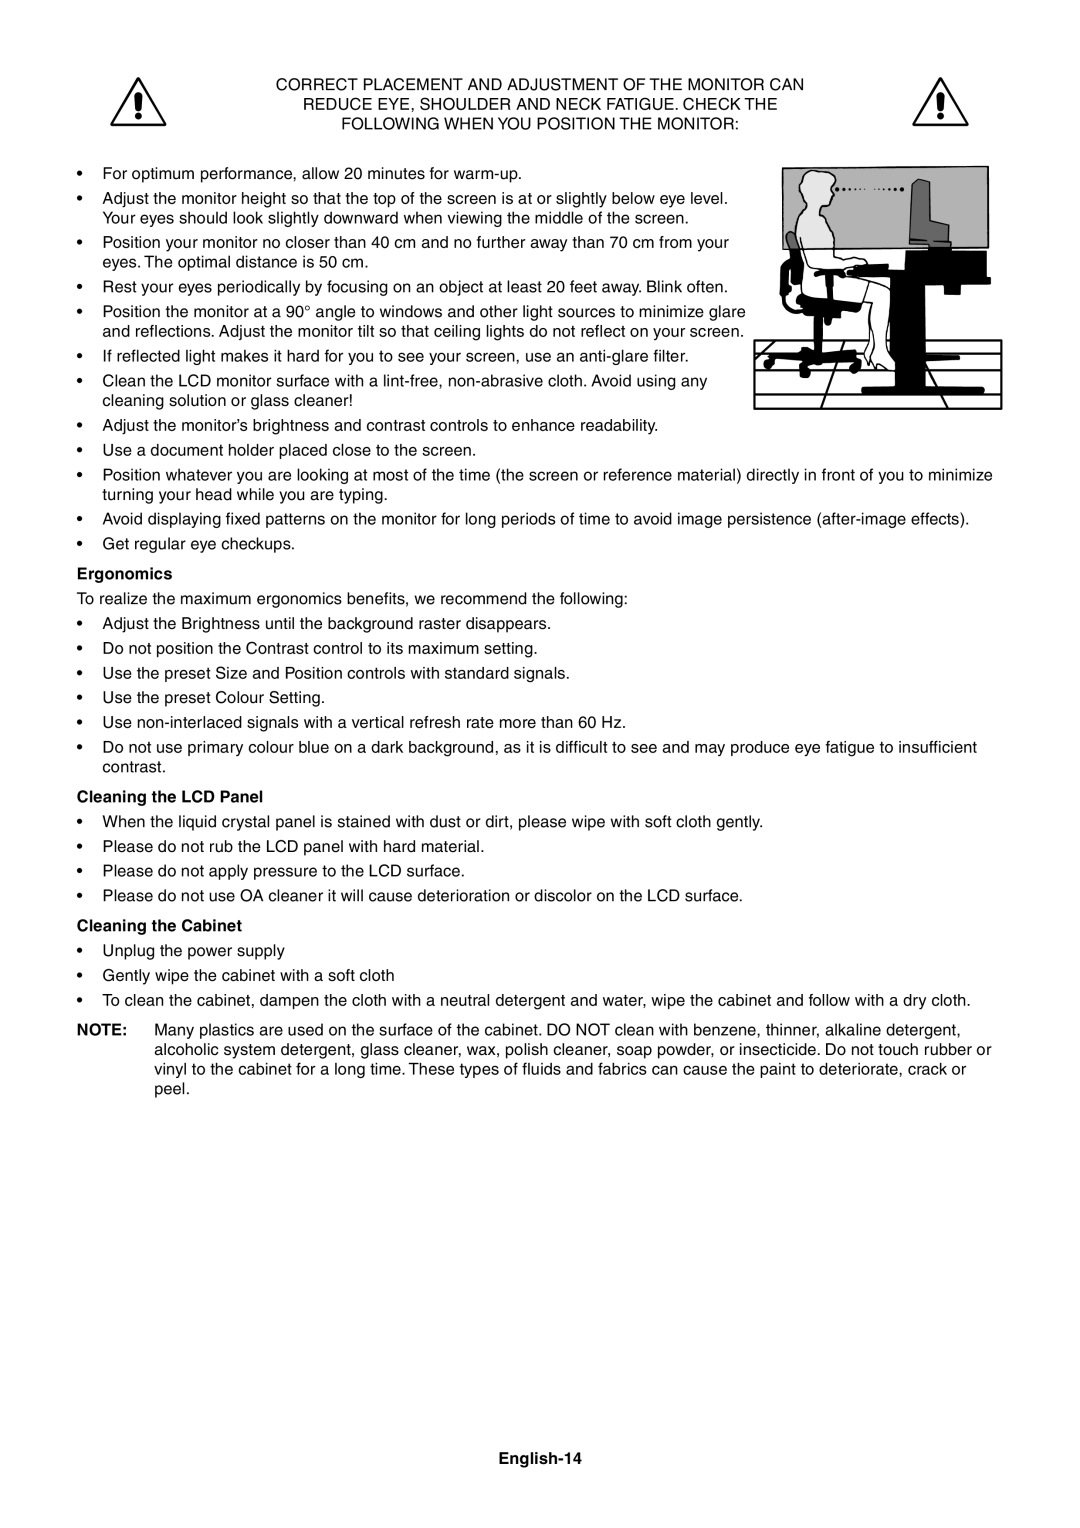 NEC LCD2090UXI user manual Ergonomics, Cleaning the LCD Panel, Cleaning the Cabinet, English-14 